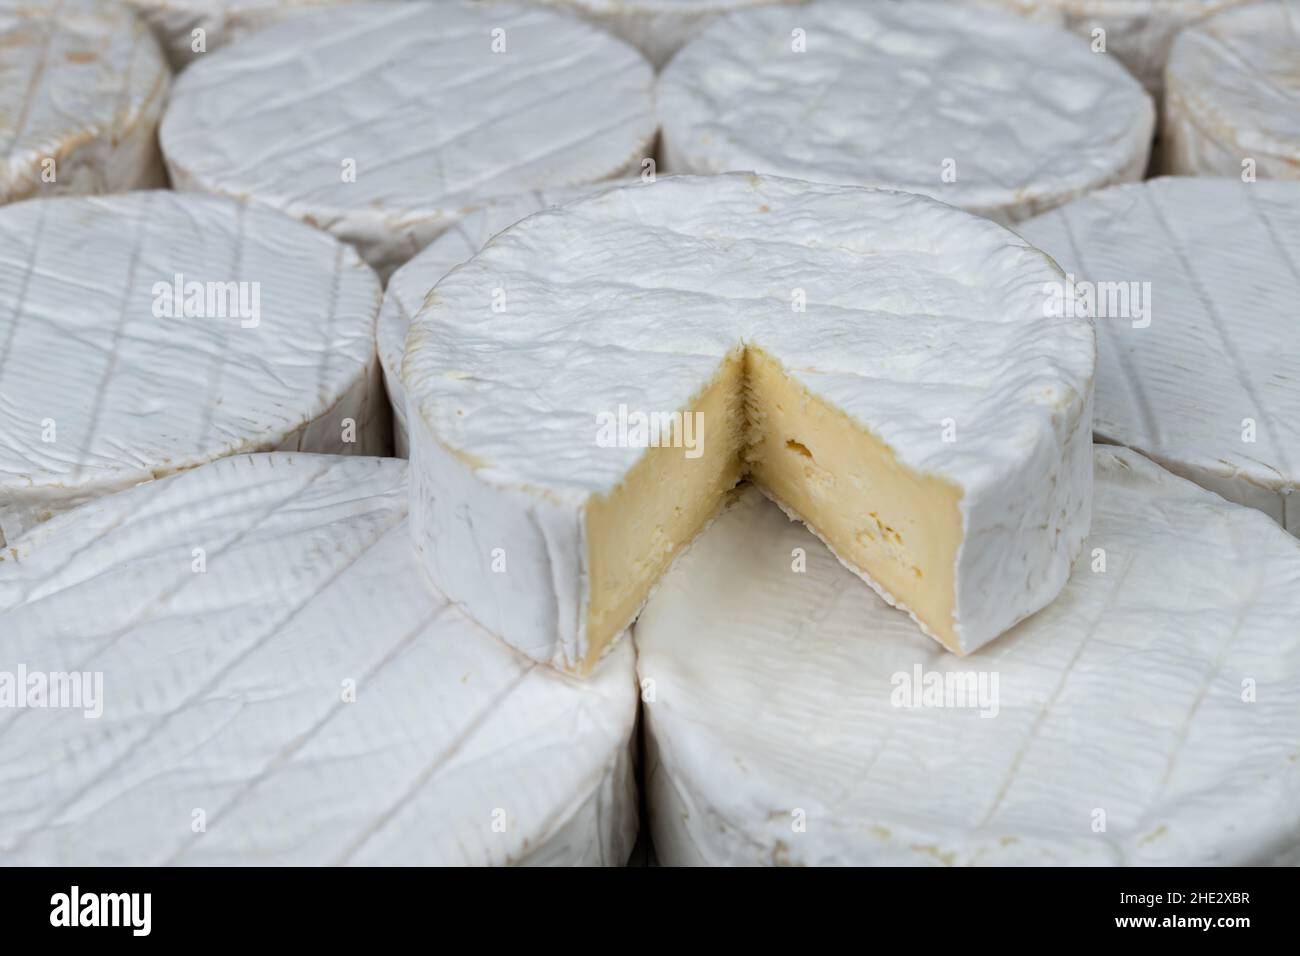 piling up of camemberts, famous cheese made in the Normandy region of France Stock Photo